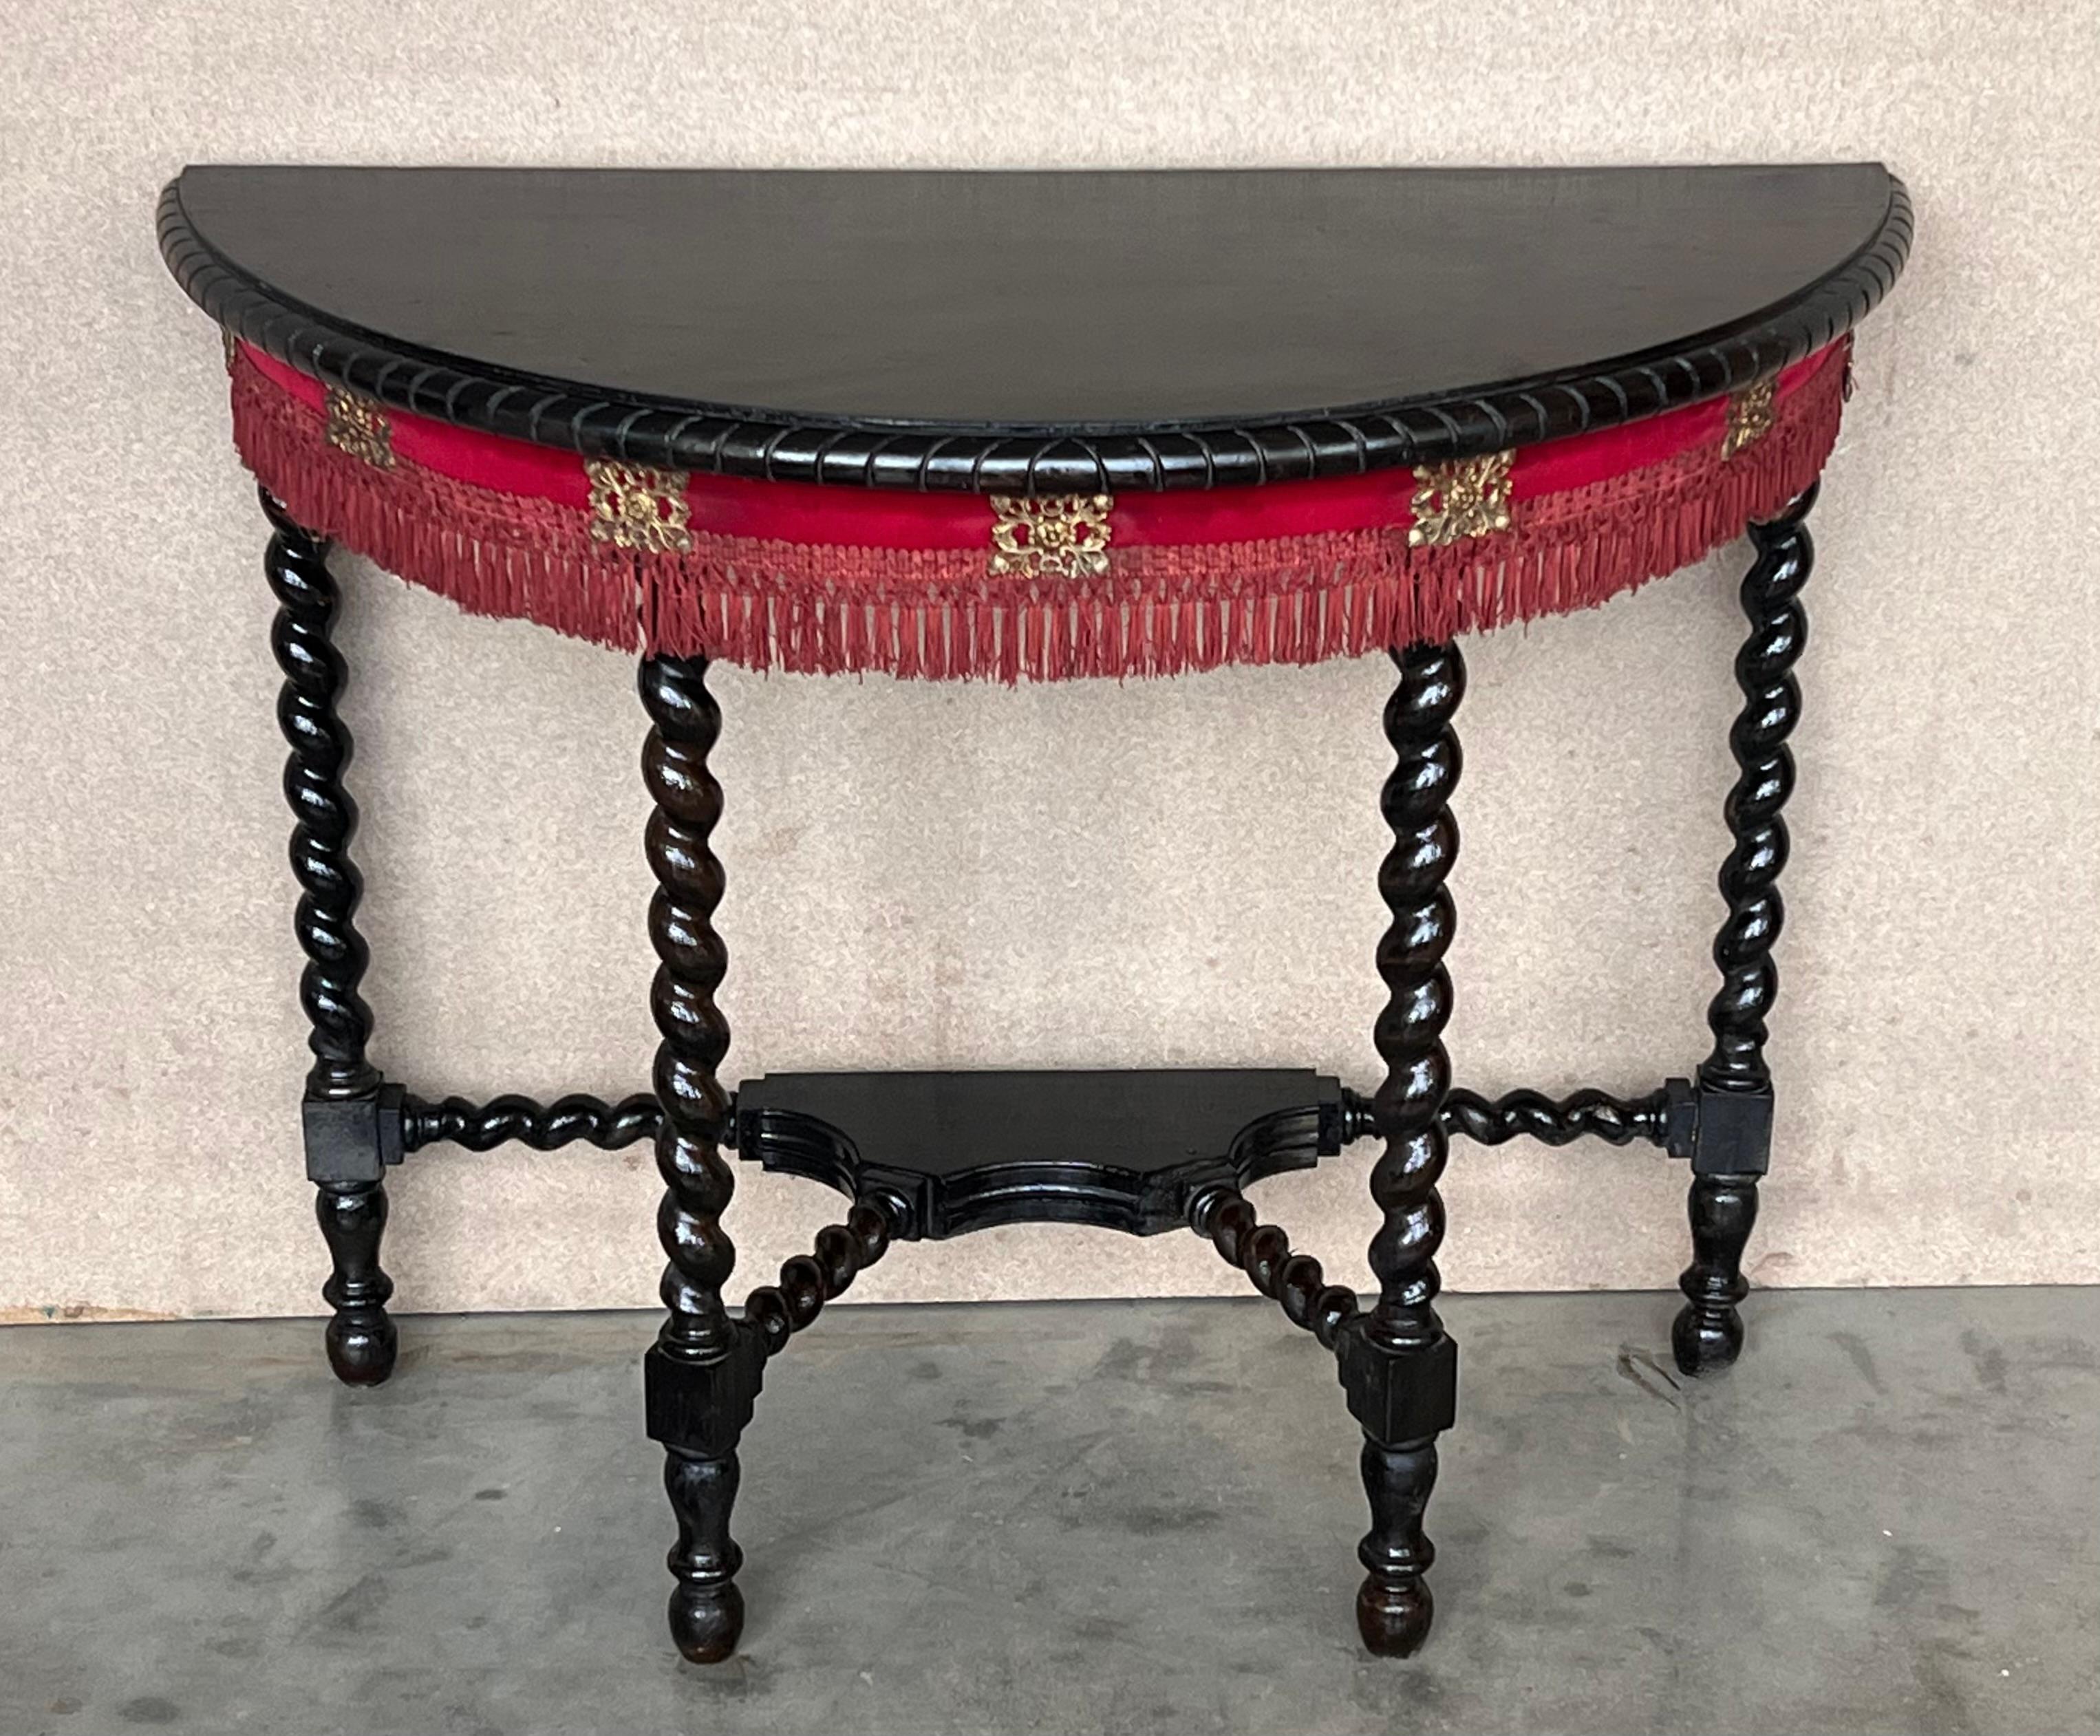 Baroque 19th Century English Demilune Table with Solomonic Legs and Fringes For Sale